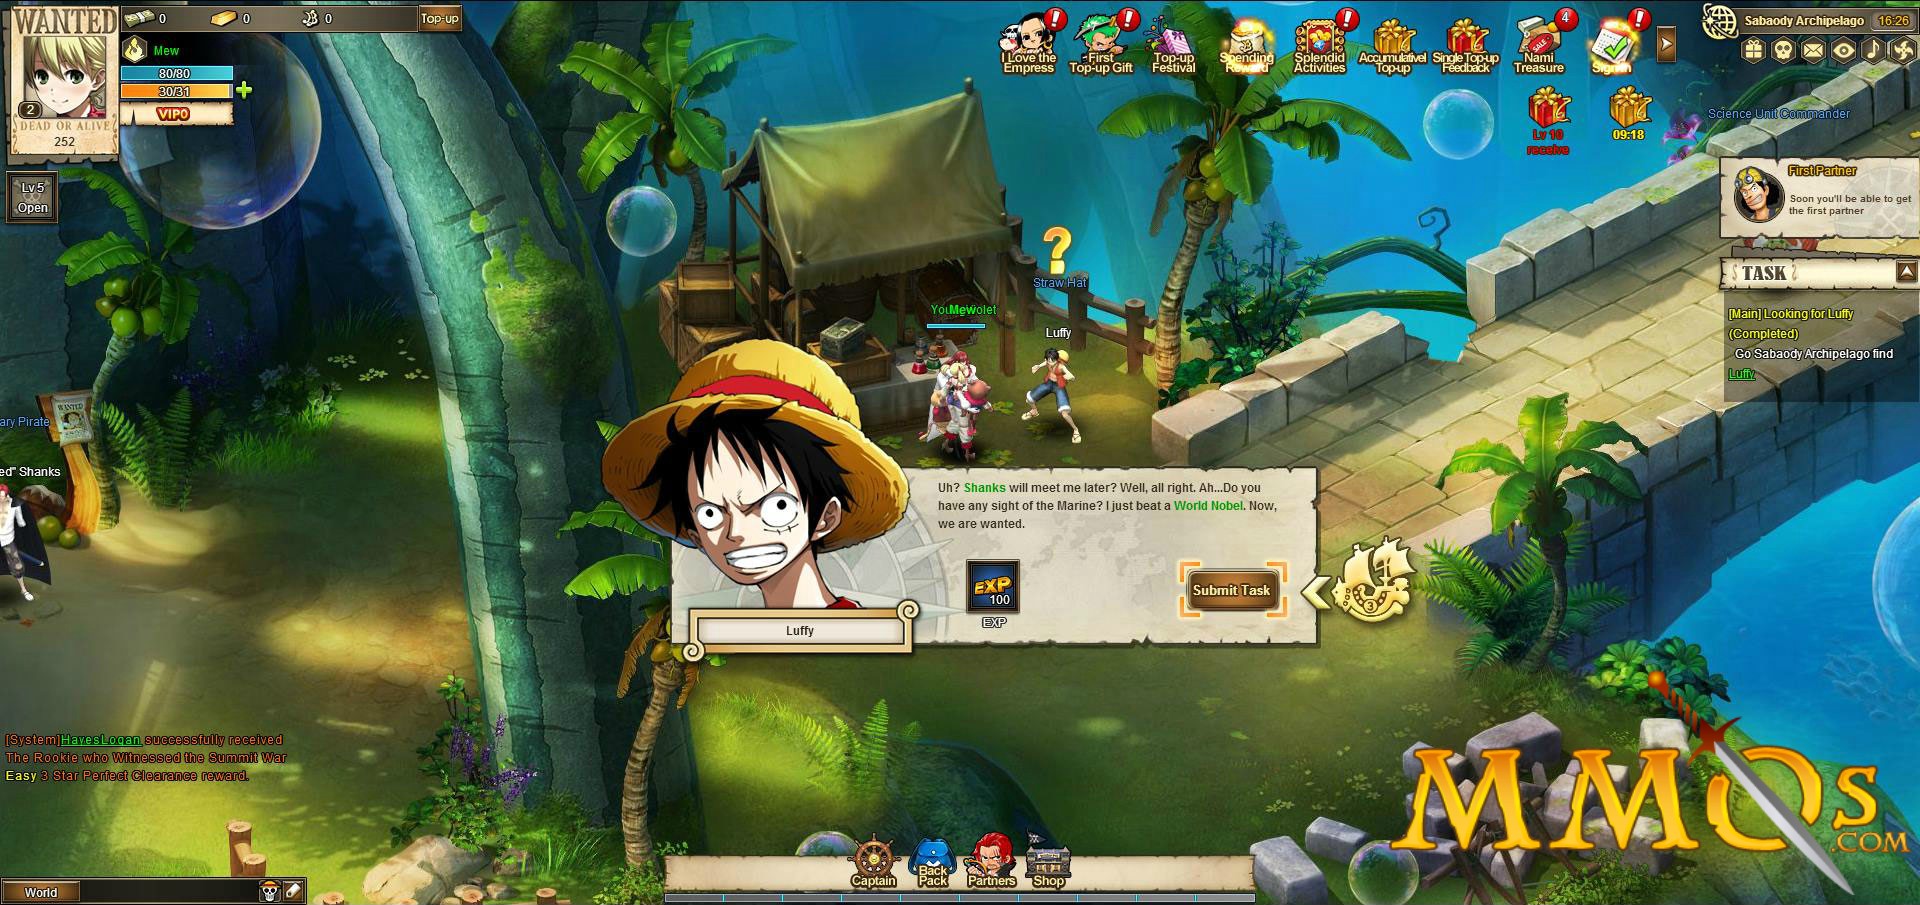 ONE PIECE TOWER DEFENSE free online game on